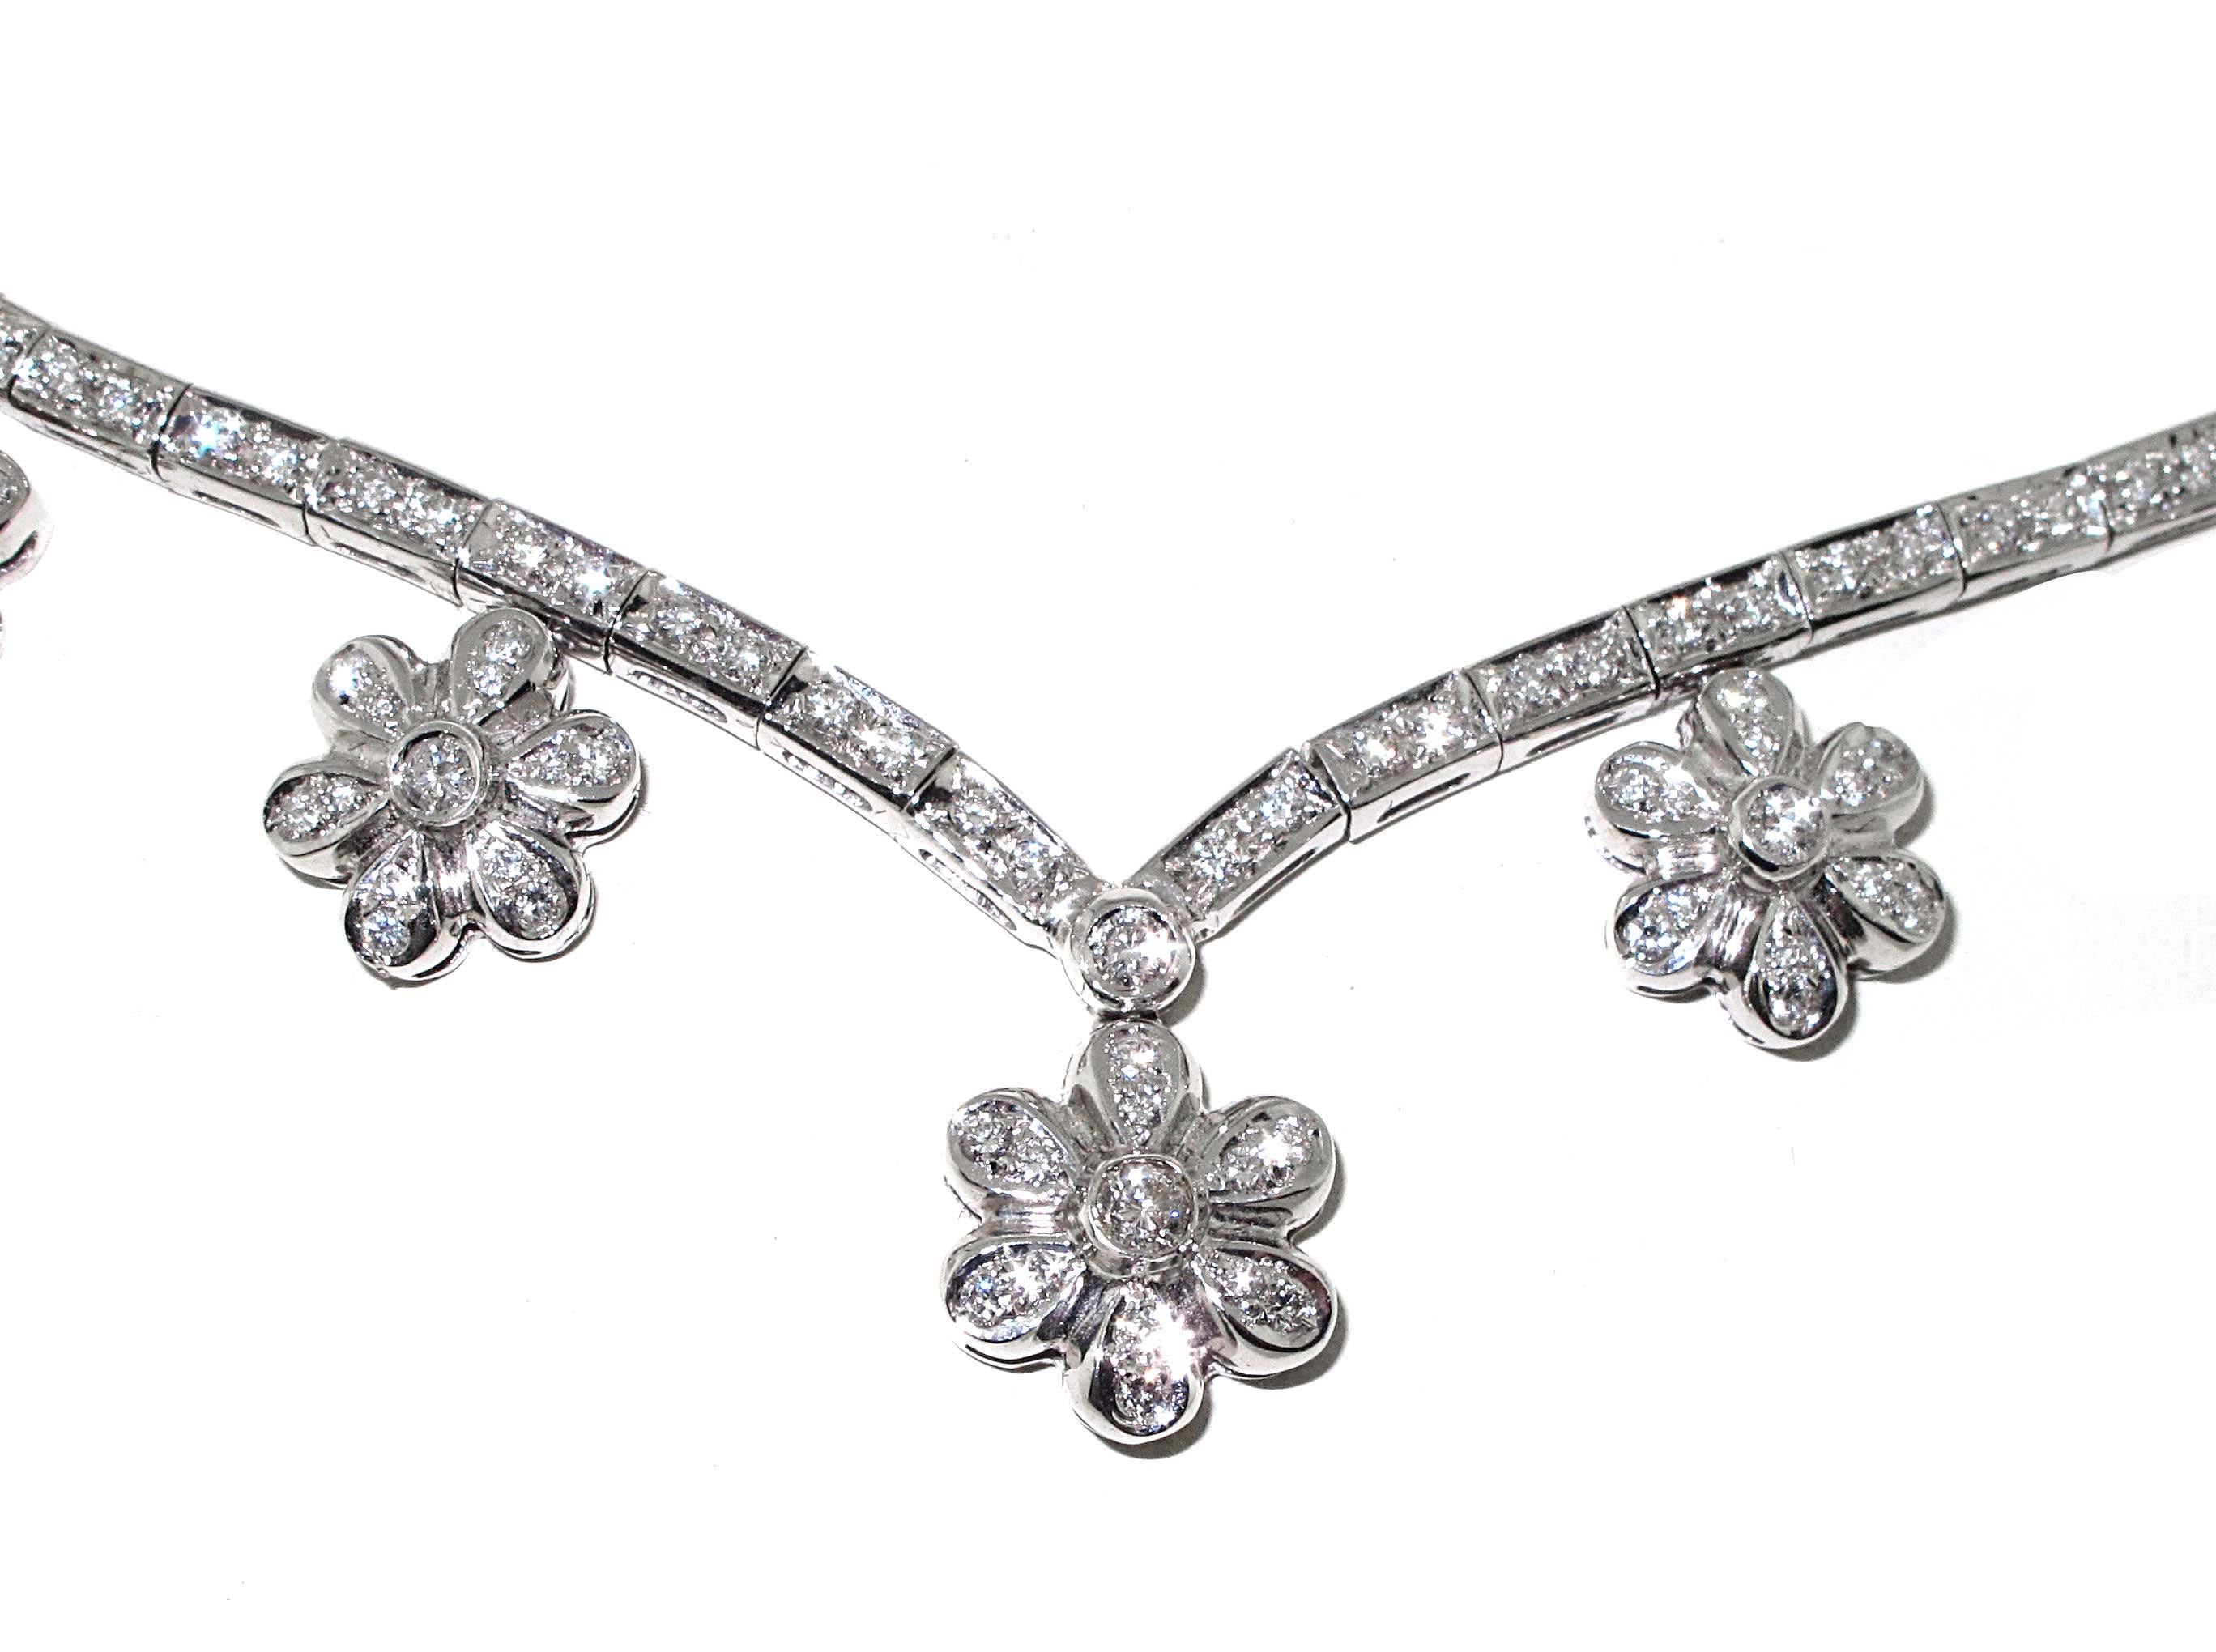 An excellent necklace for a night on the town. Over 4 carats of white diamonds set in 18kt white gold help make this flower necklace extremely unique. Very nice on the neck line because it comes to a V in the center. There are diamonds on each